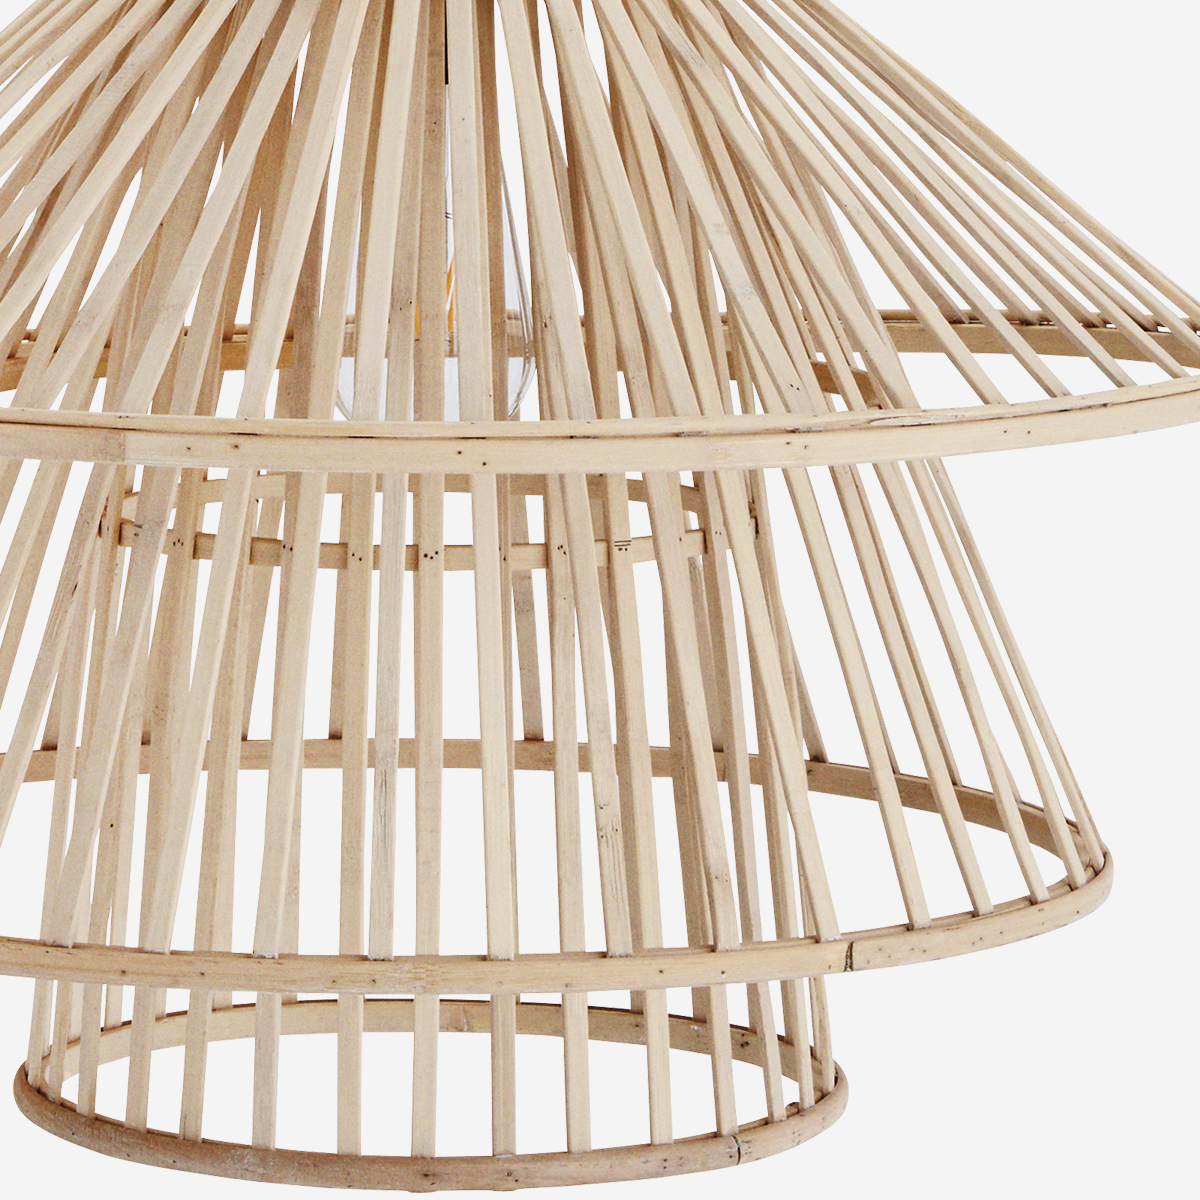 Bamboo Tiered Ceiling Lamp